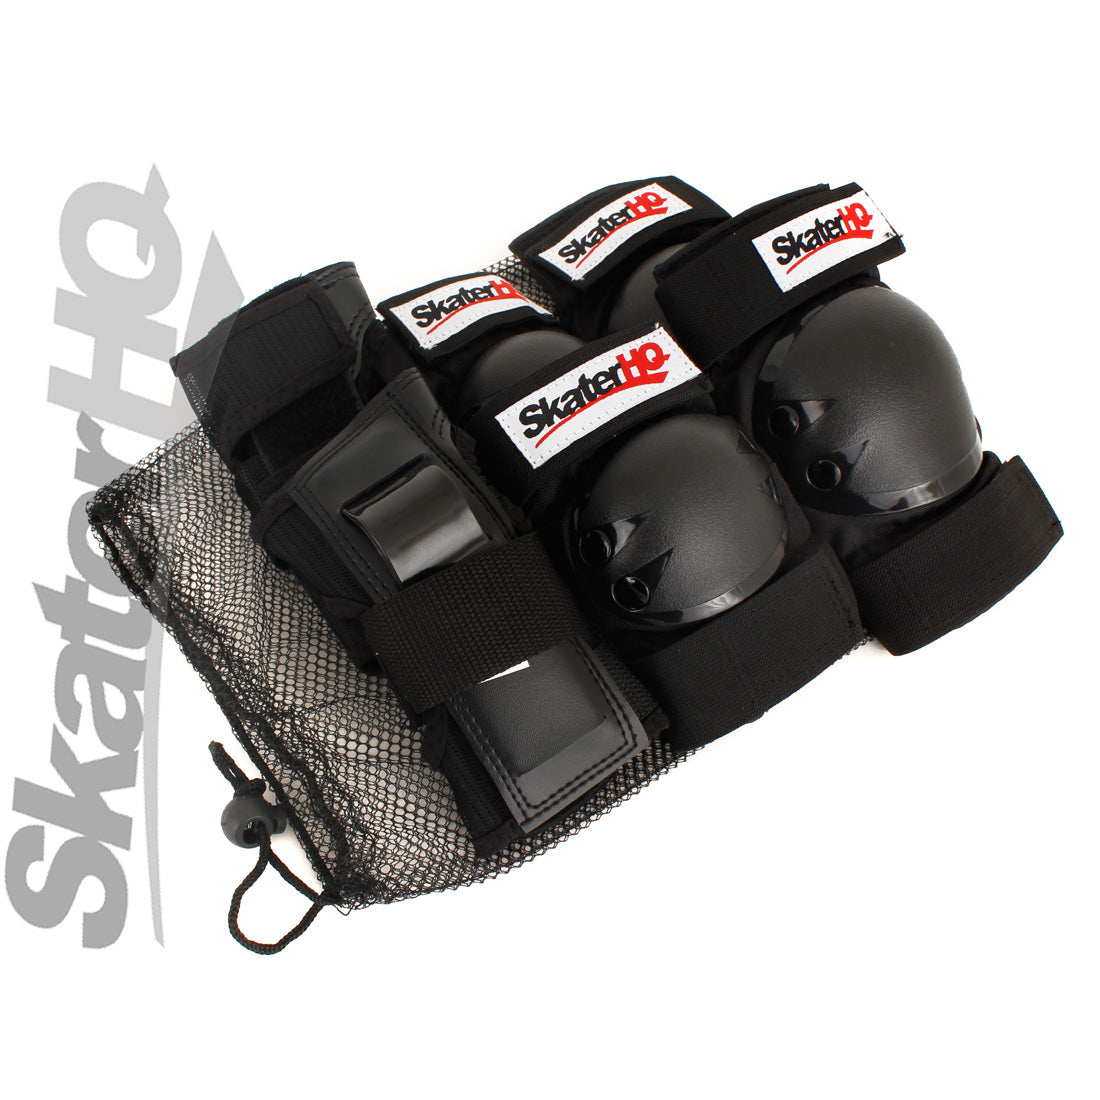 Skater HQ Tri Pack - Junior Protective Gear